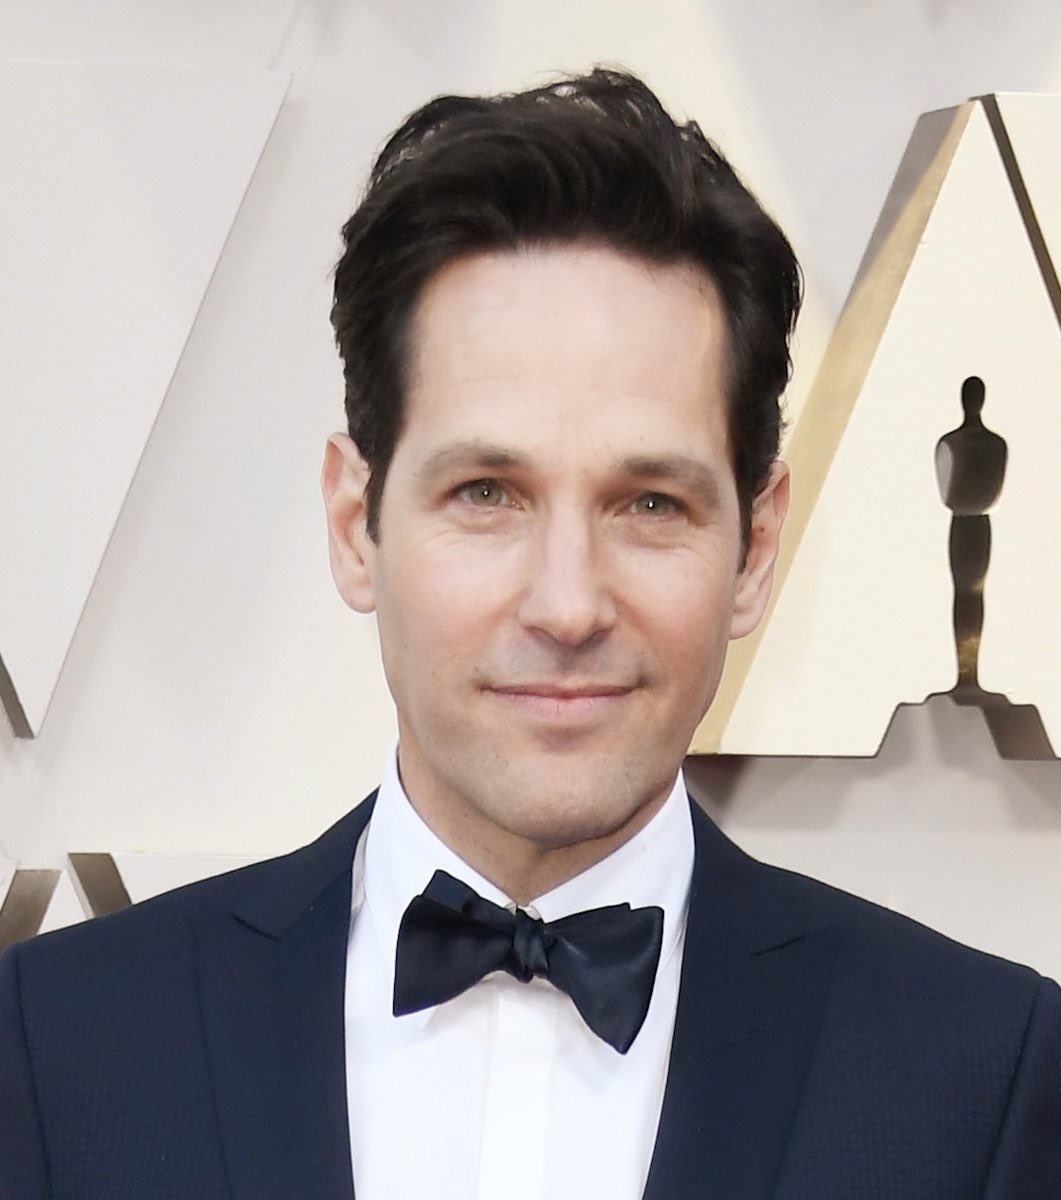 Diana McCallum on Twitter: "Paul Rudd turns 50 today and in 